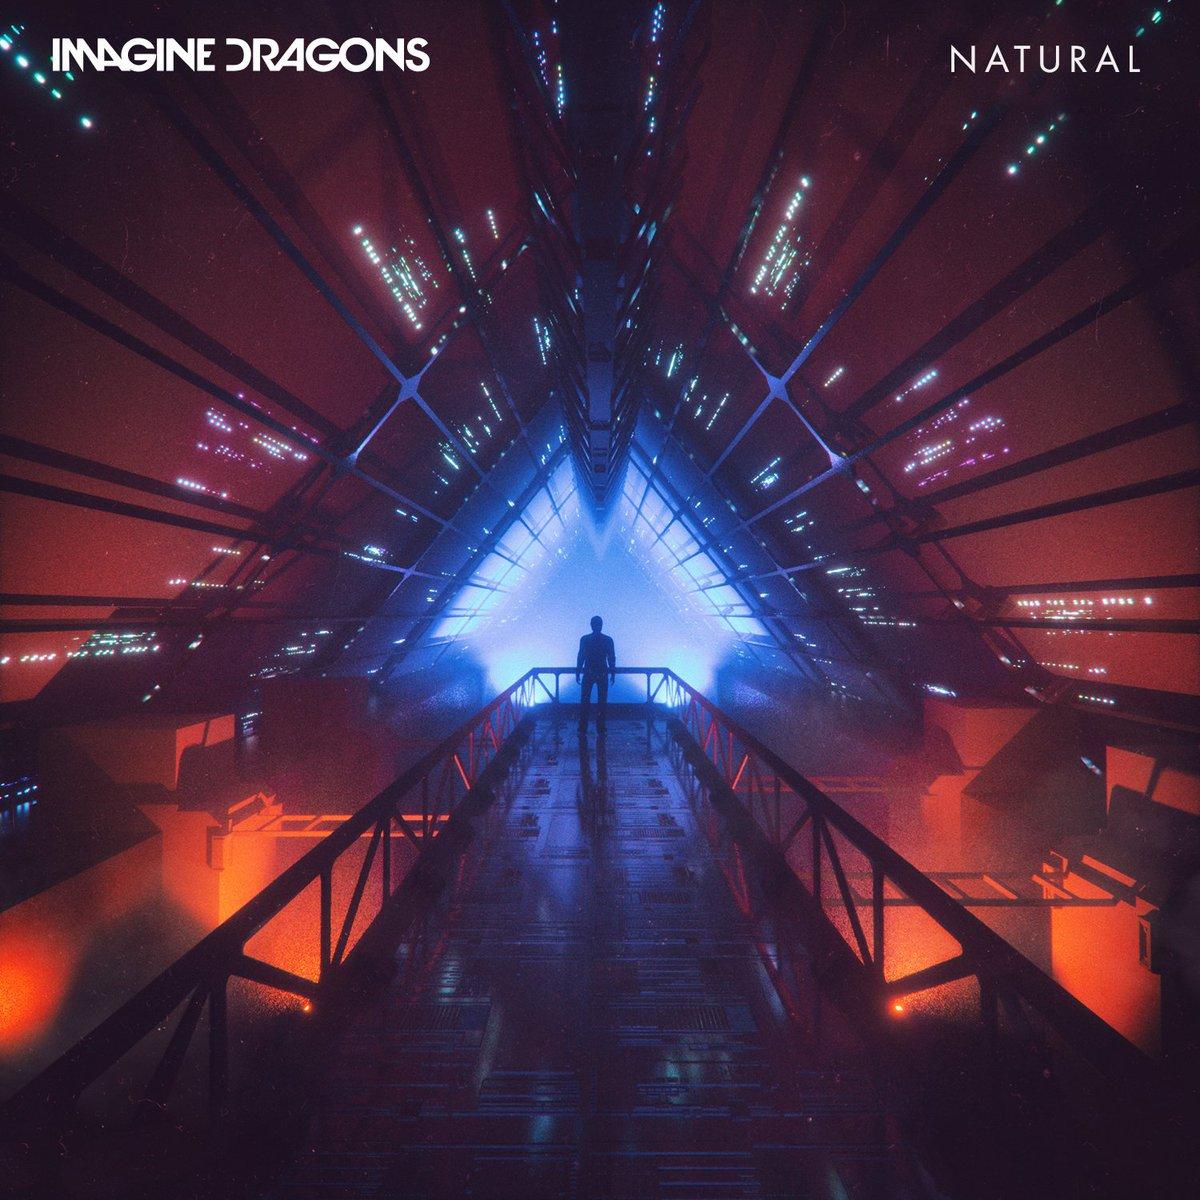 Imagine Dragons new single 'Natural' is OUT NOW